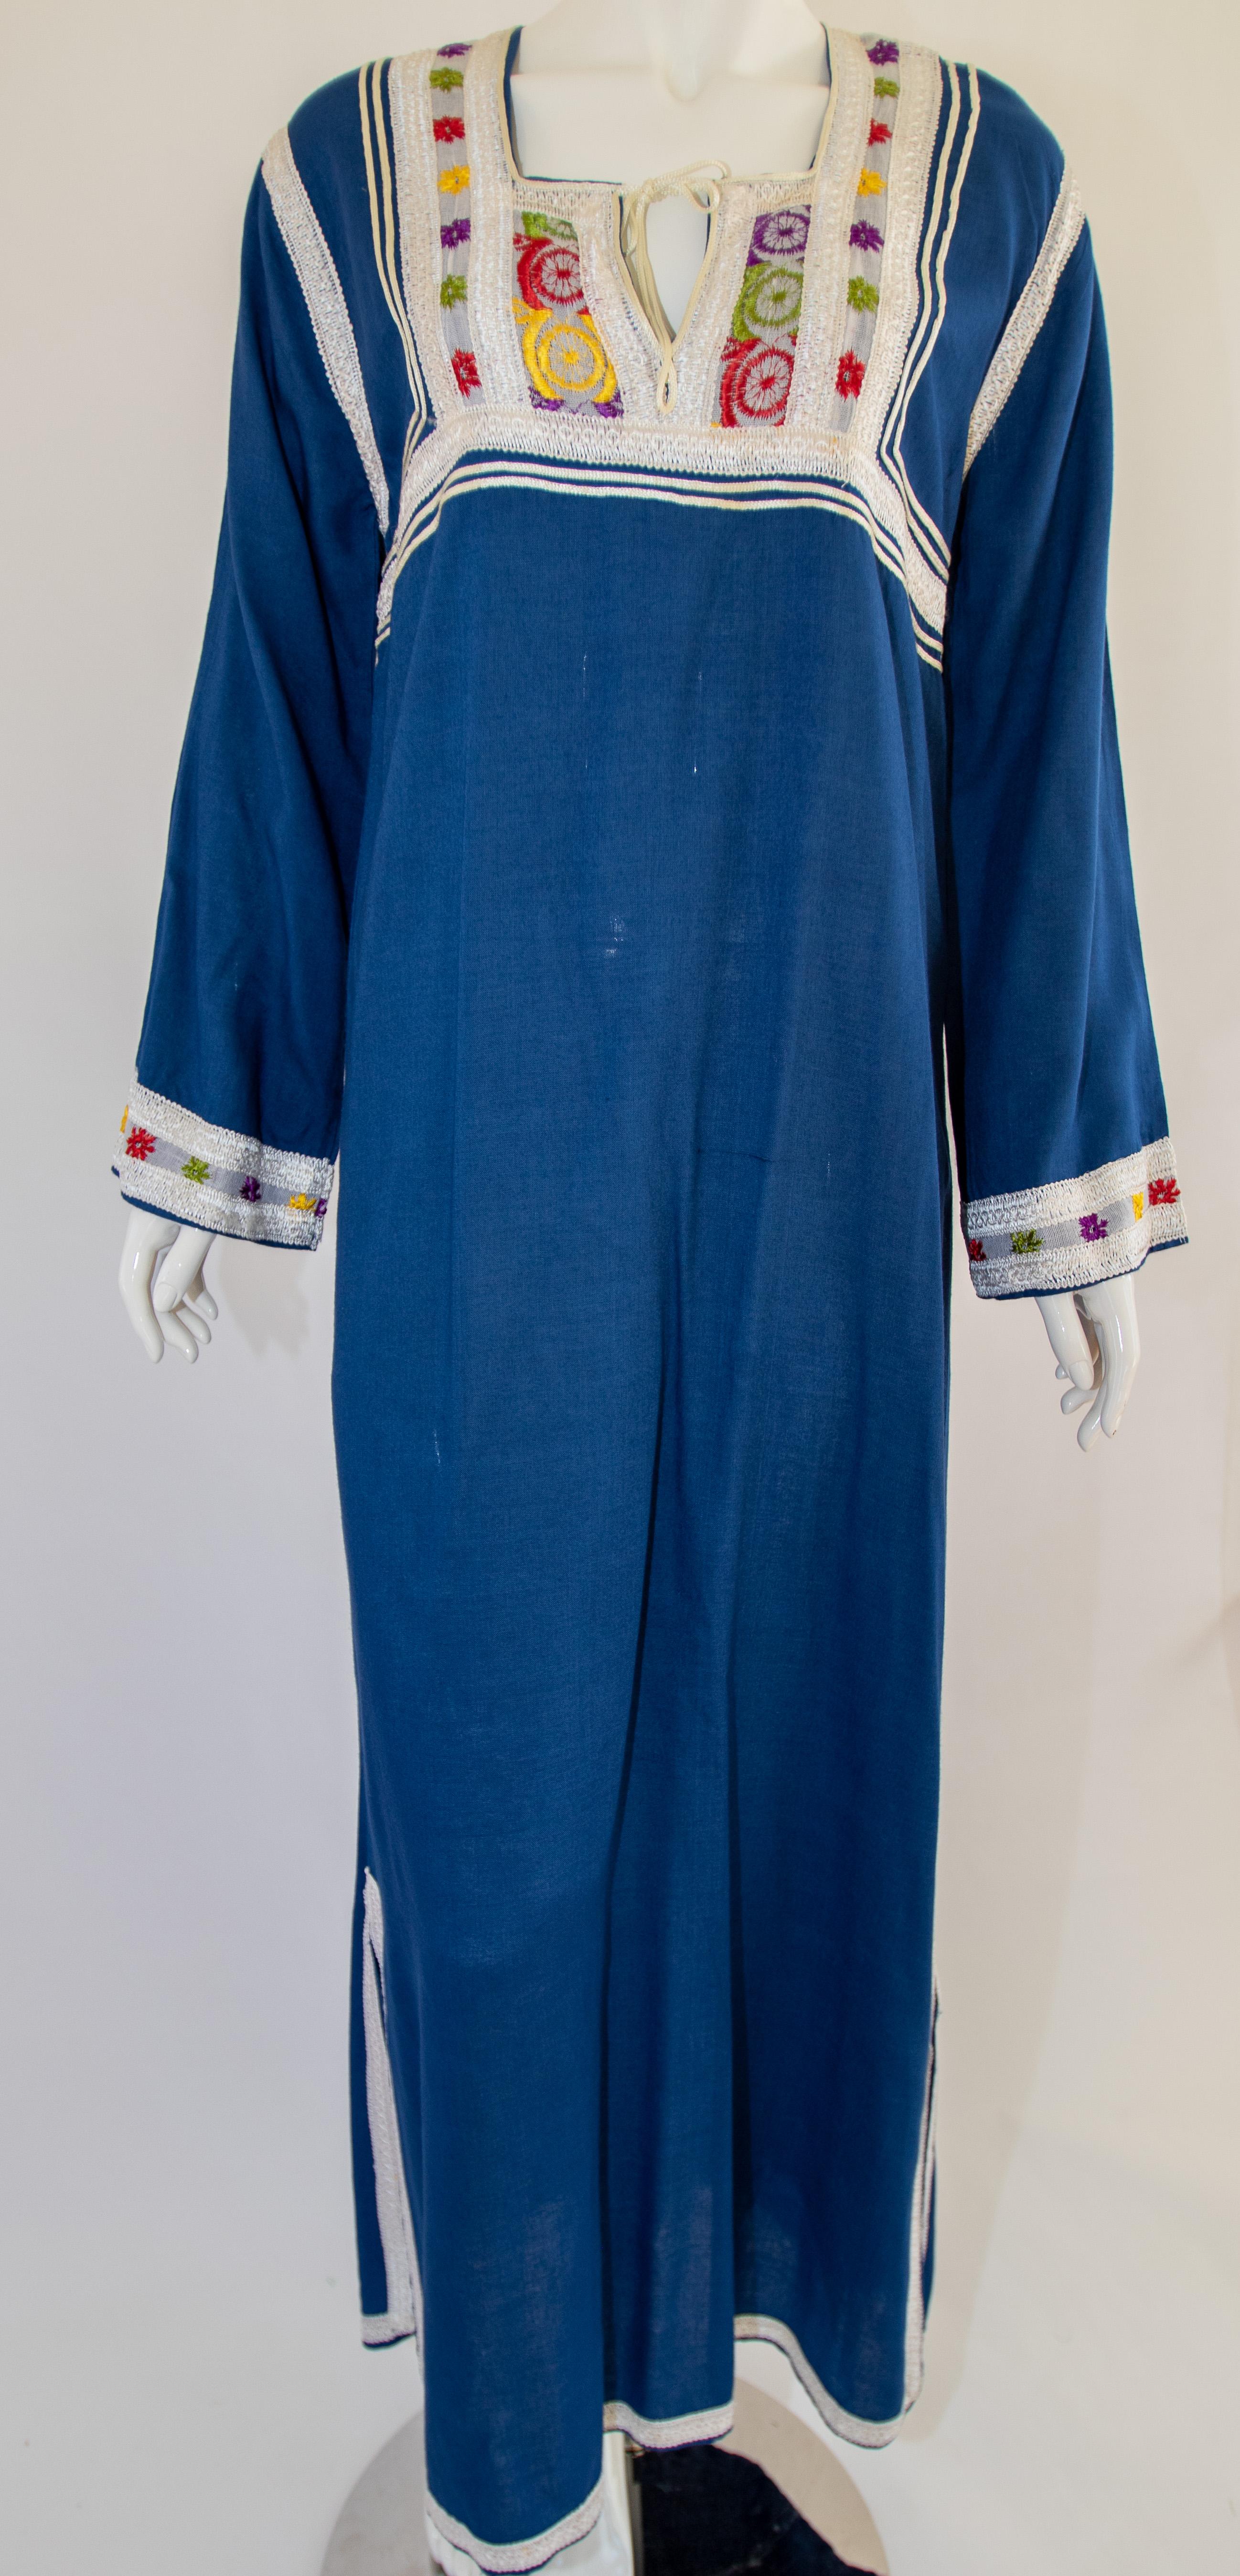 Moroccan Vintage Blue Caftan, 1970 Maxi Dress Kaftan by Glenn Boston Size M In Good Condition For Sale In North Hollywood, CA